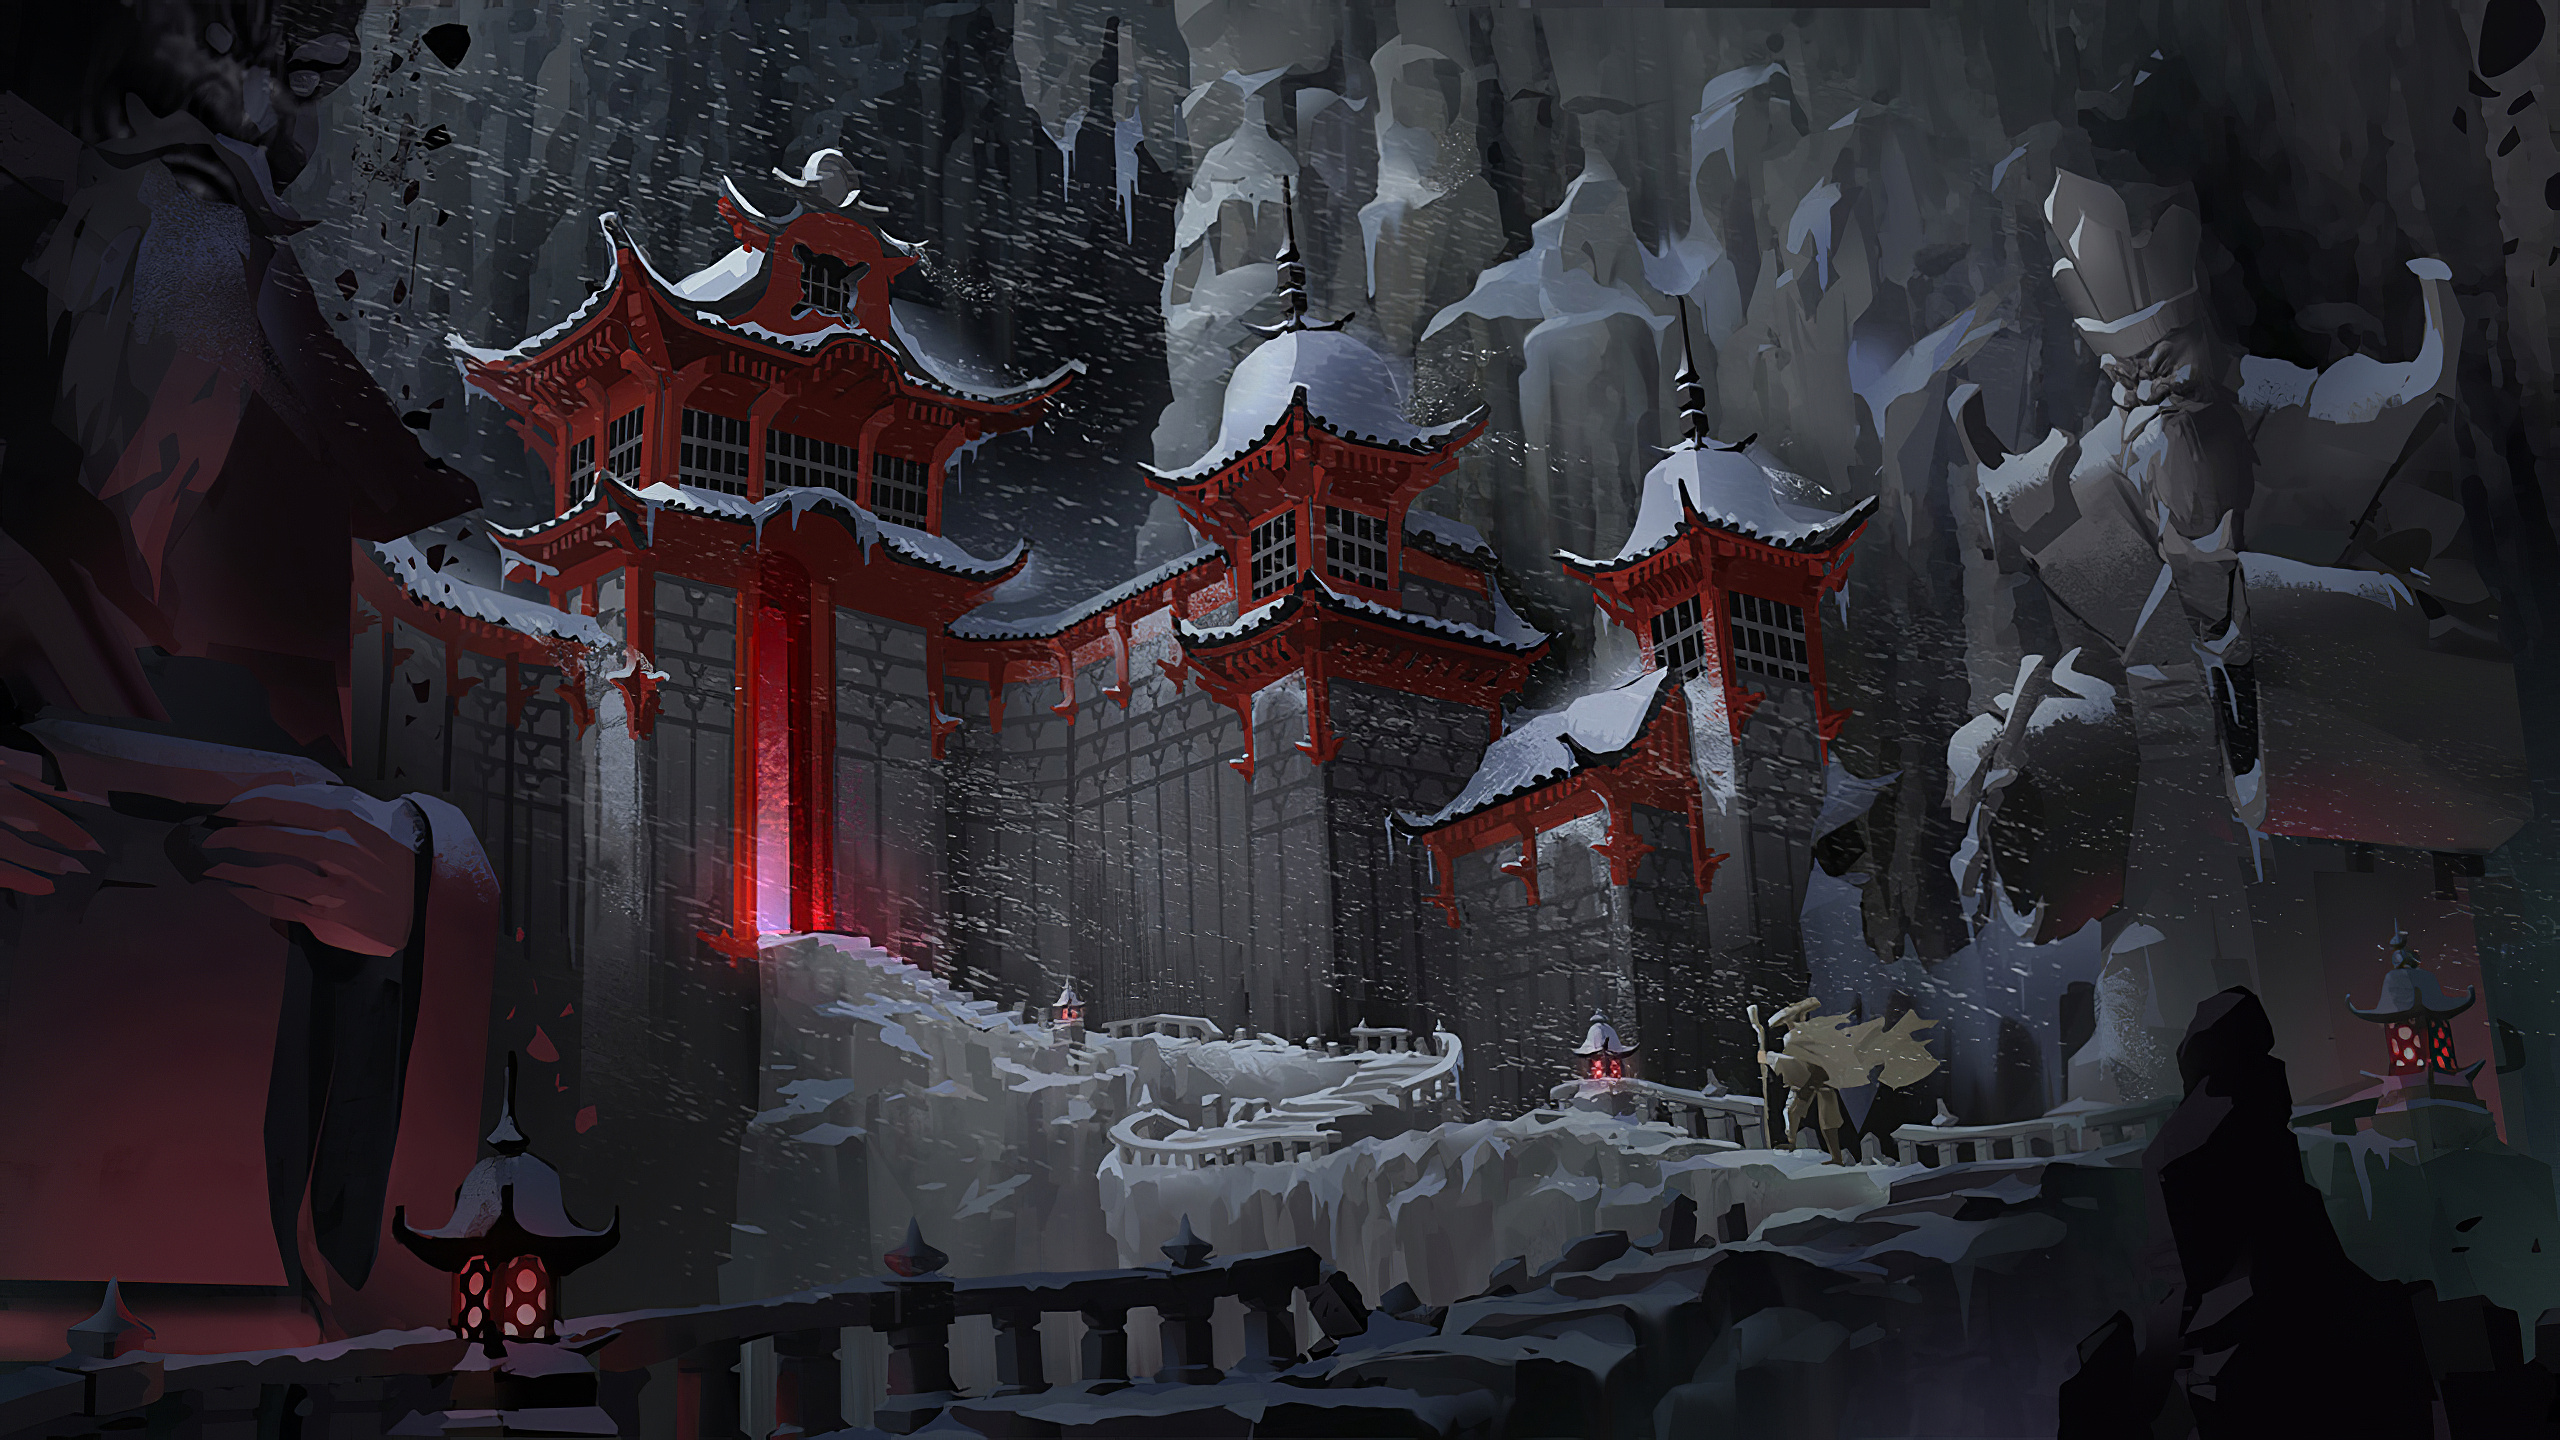 General 2560x1440 architecture digital art building cave cold winter concept art environment ice landscape snow stairs statue lantern structure Feudal Japan Japan fantasy architecture fantasy art town